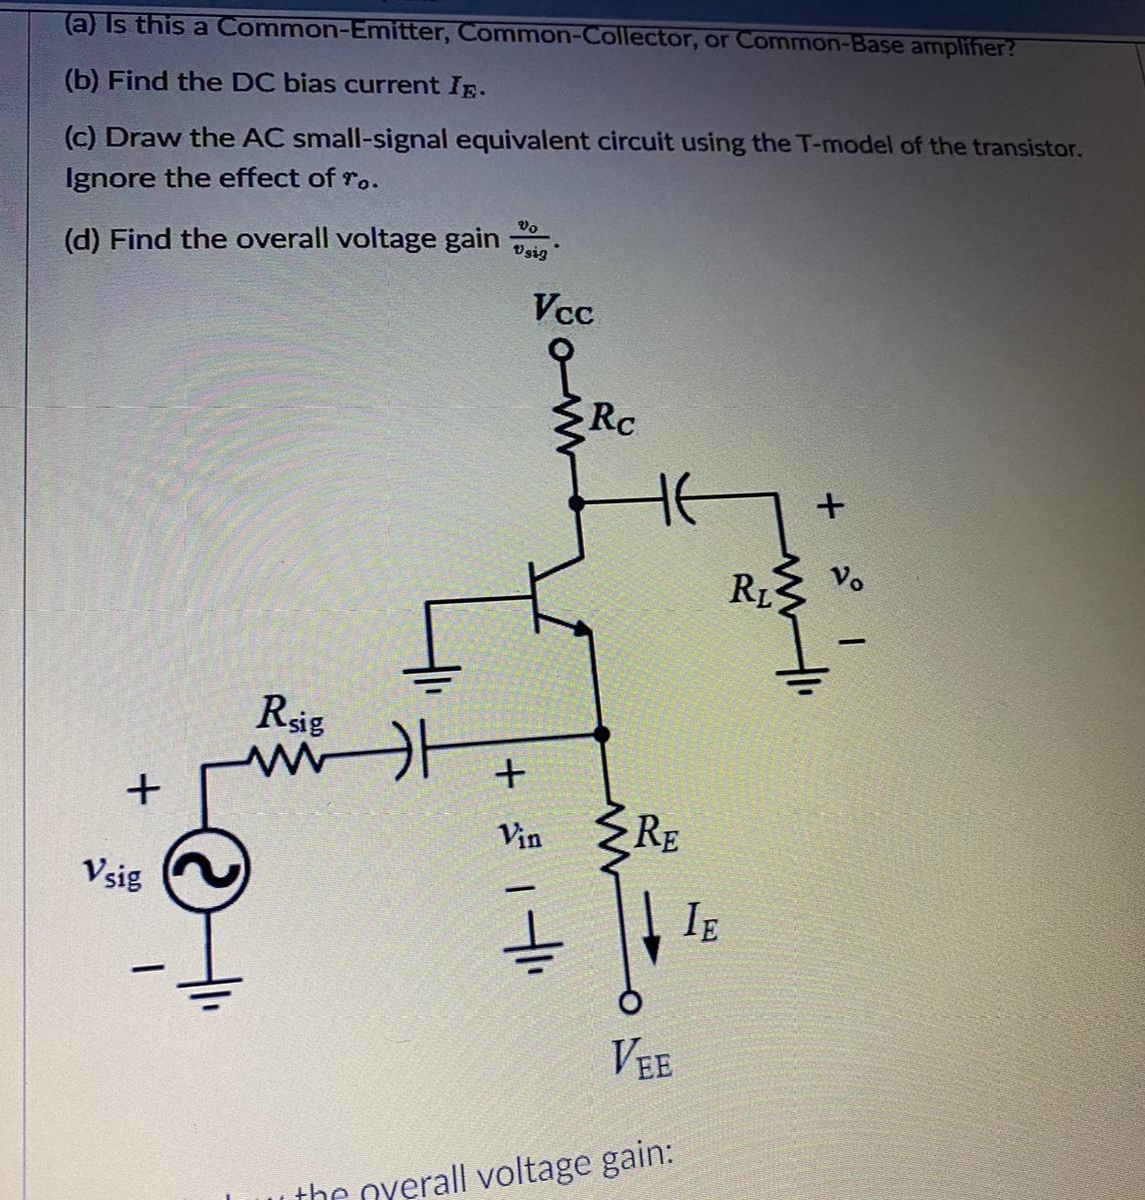 (a) Is this a Common-Emitter, Common-Collector, or Common-Base amplifier?
(b) Find the DC bias current Ip.
(c) Draw the AC small-signal equivalent circuit using the T-model of the transistor.
Ignore the effect of ro.
Vo
(d) Find the overall voltage gain
Vsig
Vcc
Rc
RL
Rsig
RE
Vin
Vsig
IE
VEE
the overall voltage gain:
+
